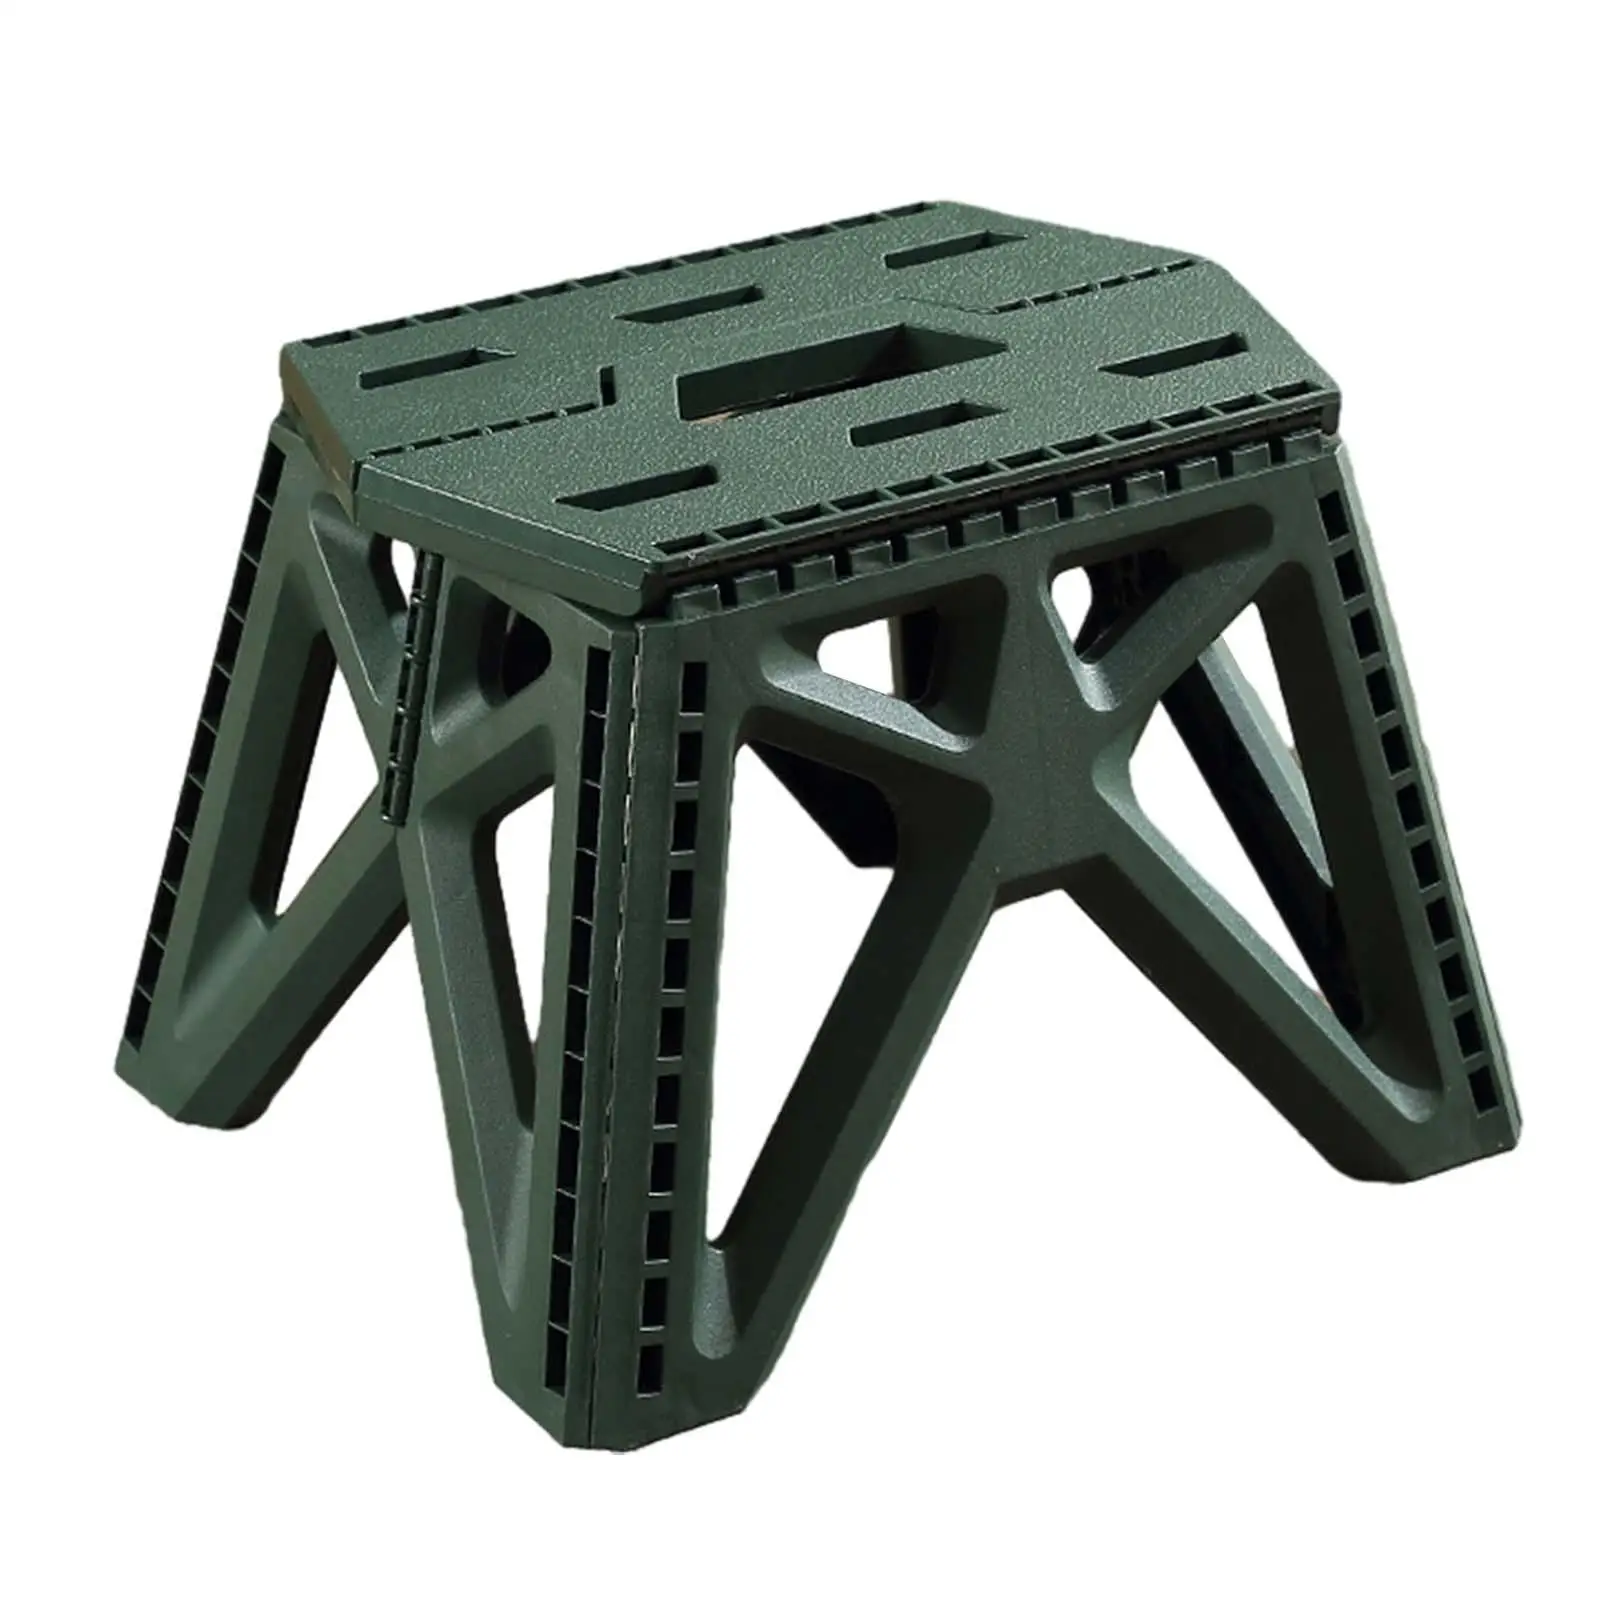 Folding Camping Stool Compact Collapsible Ultralight Outdoor Foldable Stool Camping Chair for Picnic Backyard Travel Hiking